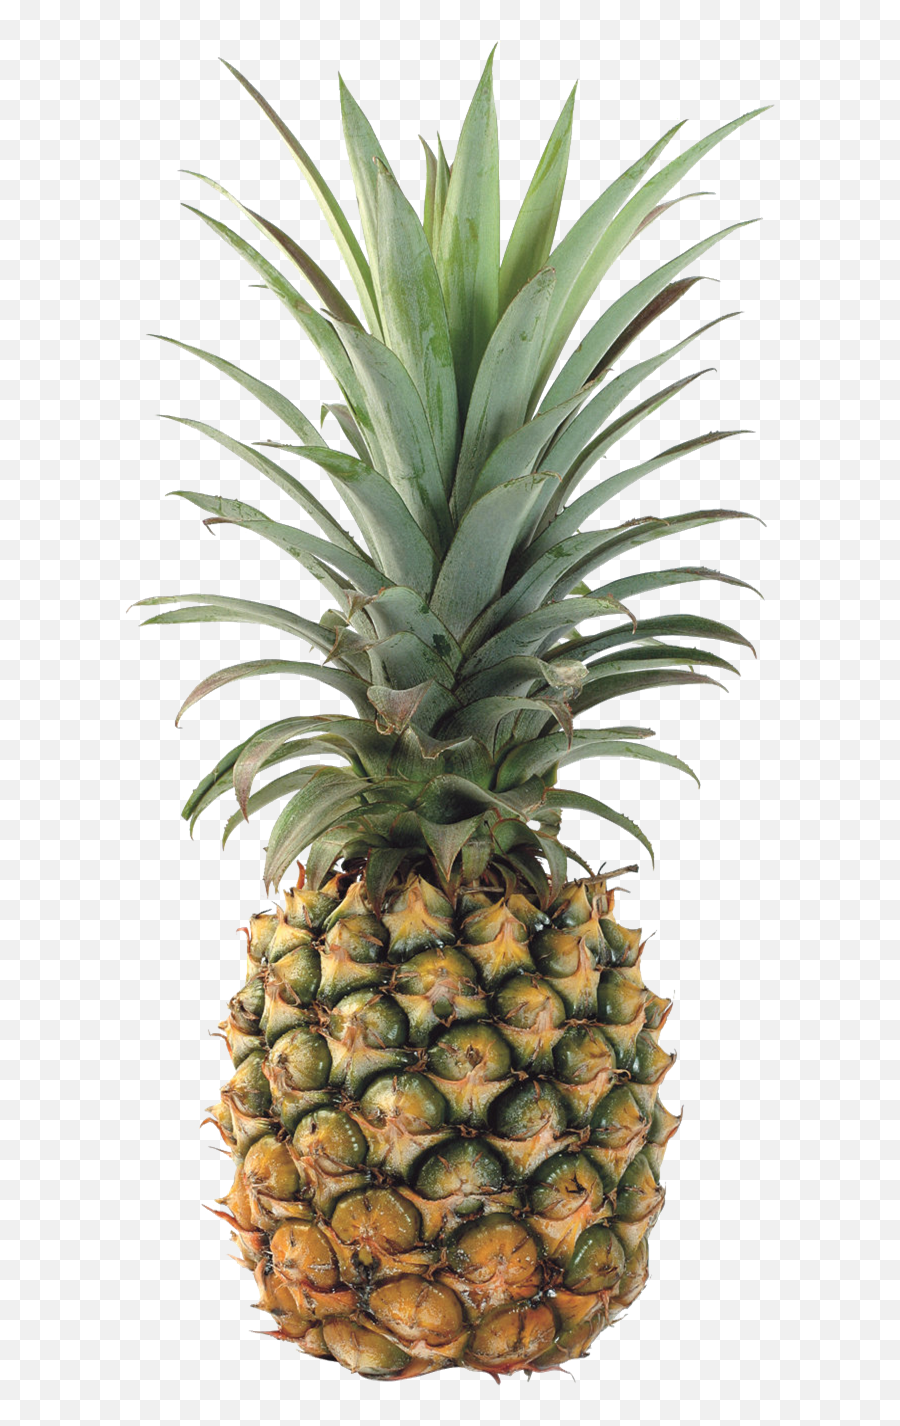 Png Pineapple Transparent Background - Pineapple Transparent Background,Pineapple Transparent